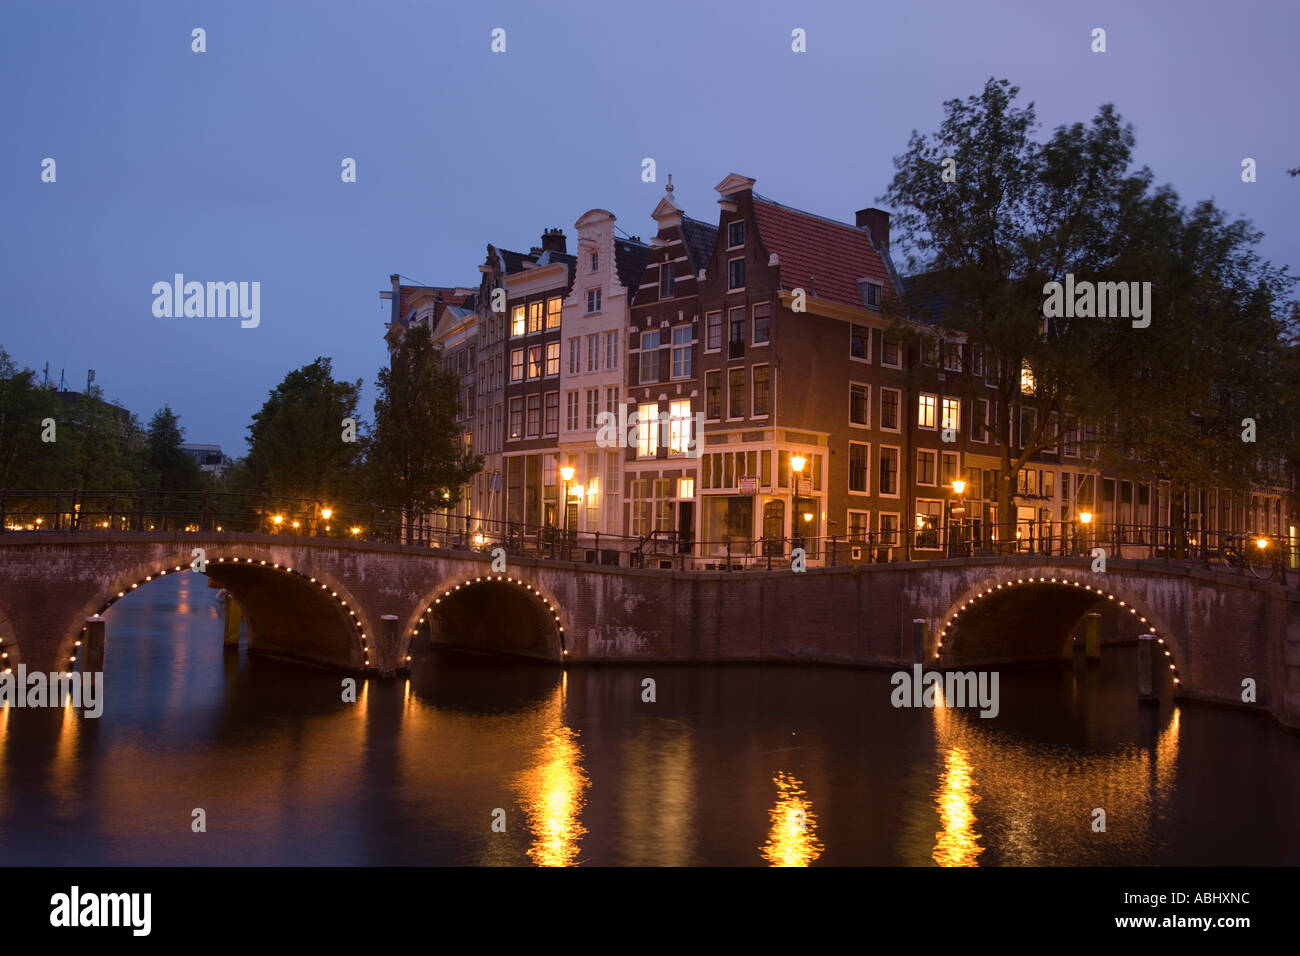 View over illuminated bridge to gabled houses in the evening Keizersgracht and Leidsegracht Amsterdam Holland Netherlands Stock Photo